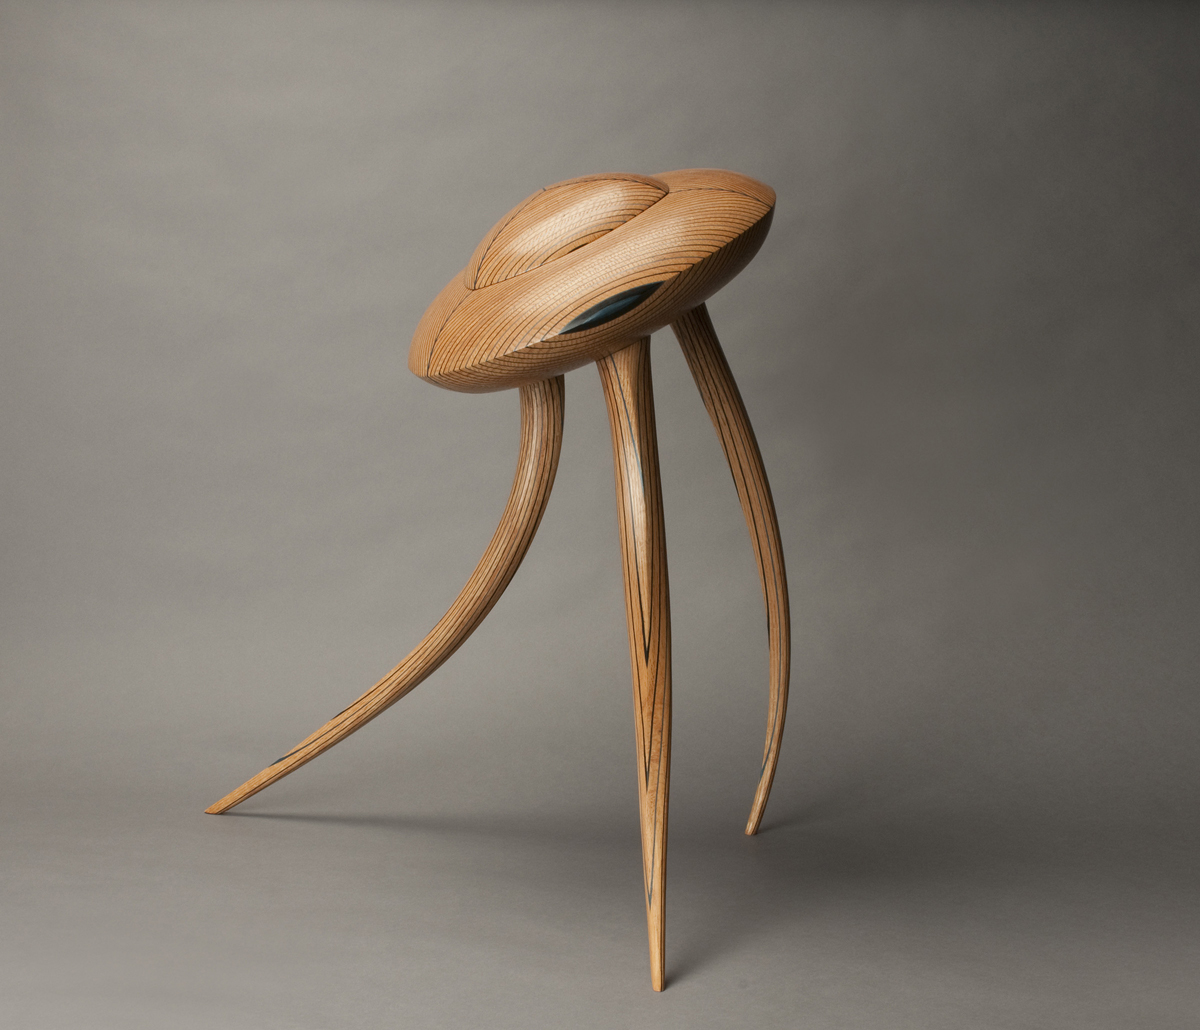 Contemporary Wood Art: Collectors' Selections - Museum for Art in Wood